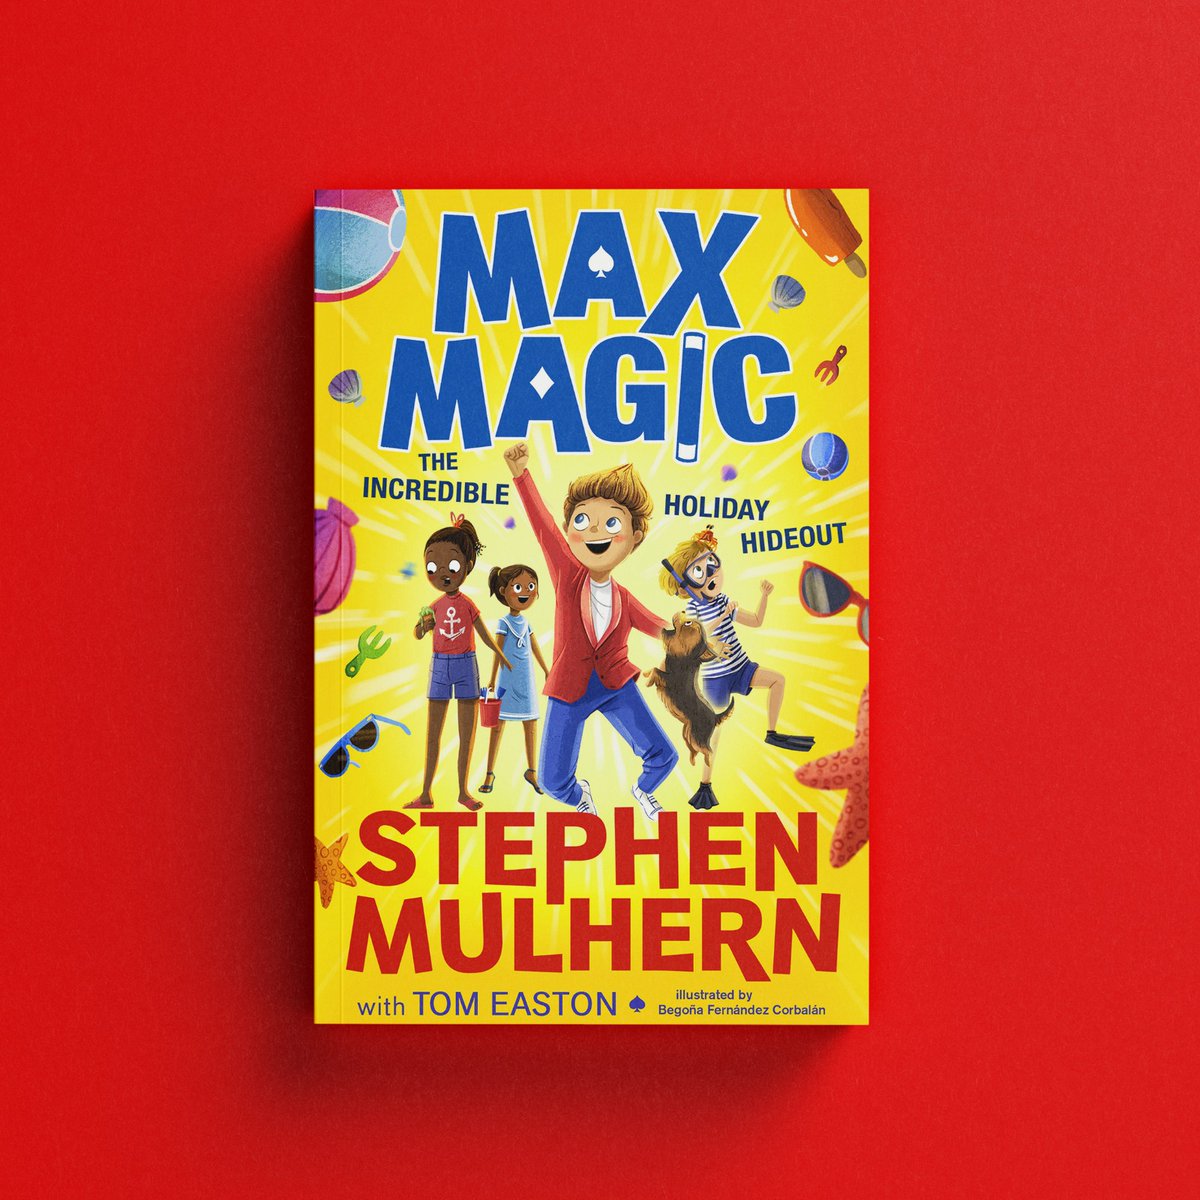 Max Magic 3 is officially out NOW! I had such a brilliant publication day yesterday, so a huge thank you to everyone who got involved in the launch and bought the book! I can’t wait for you to read it… you’re in for a treat! Haven’t got yours yet? Visit: